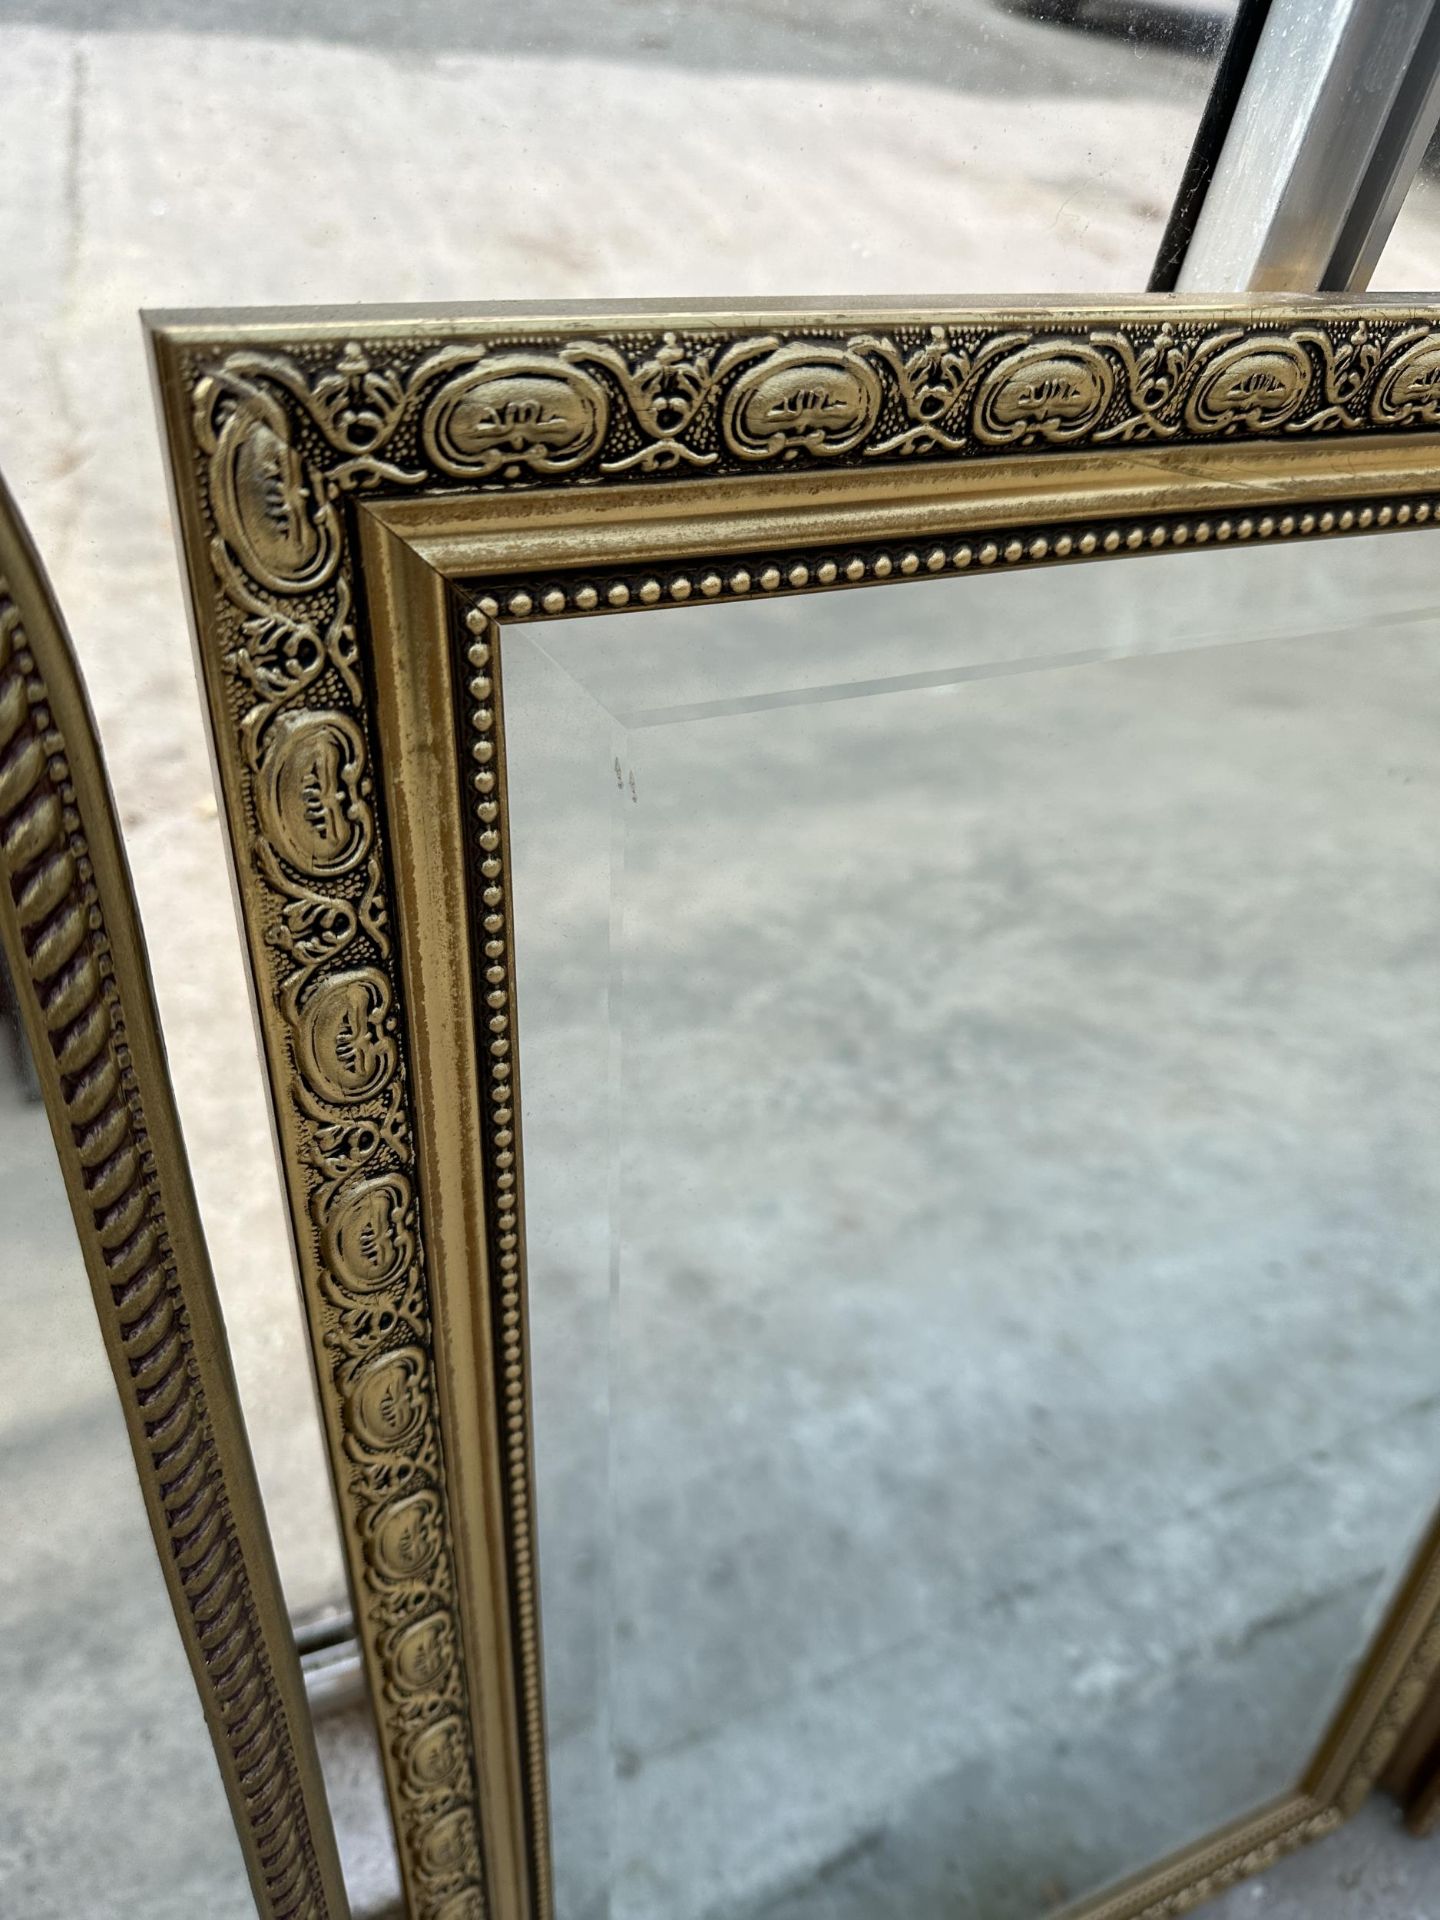 TWO GILT FRAMED MIRRORS - ONE RECTANGULAR, ONE WITH DECORATIVE ARCHED TOP - Image 3 of 3